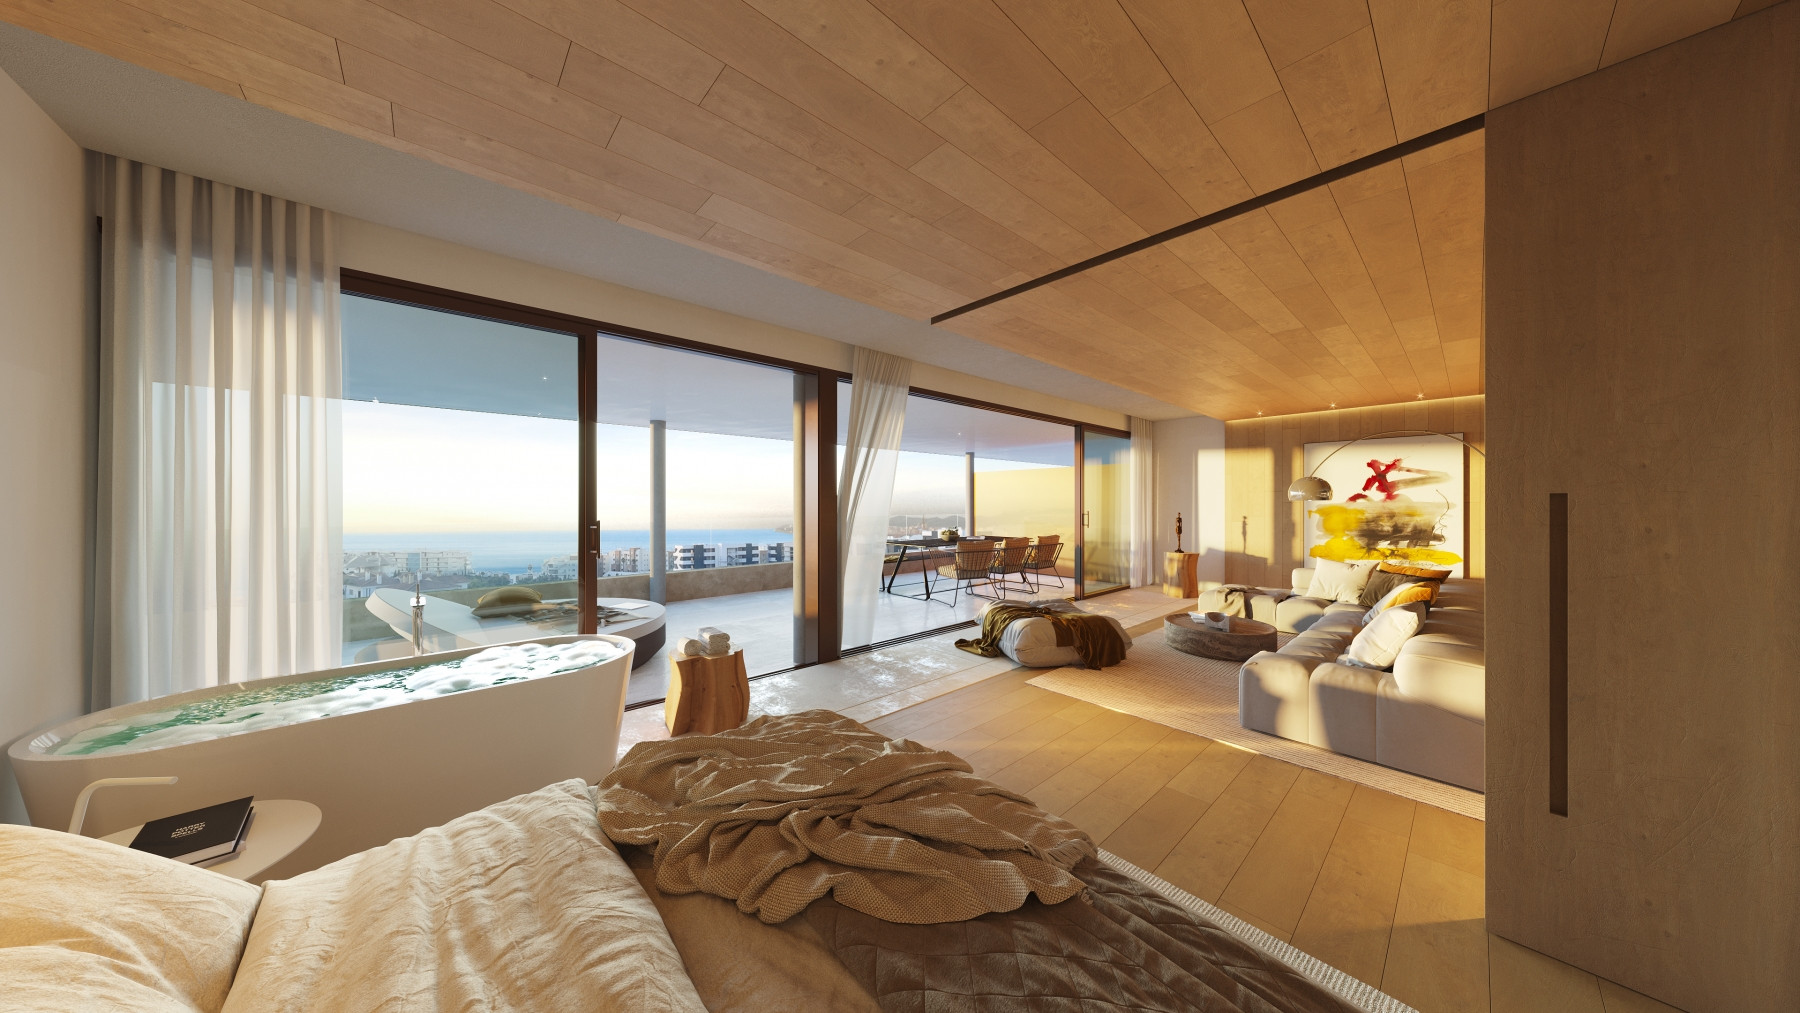 Higuerón South Residences: Luxury residential project located in El Higueron, Fuengirola. | Image 4